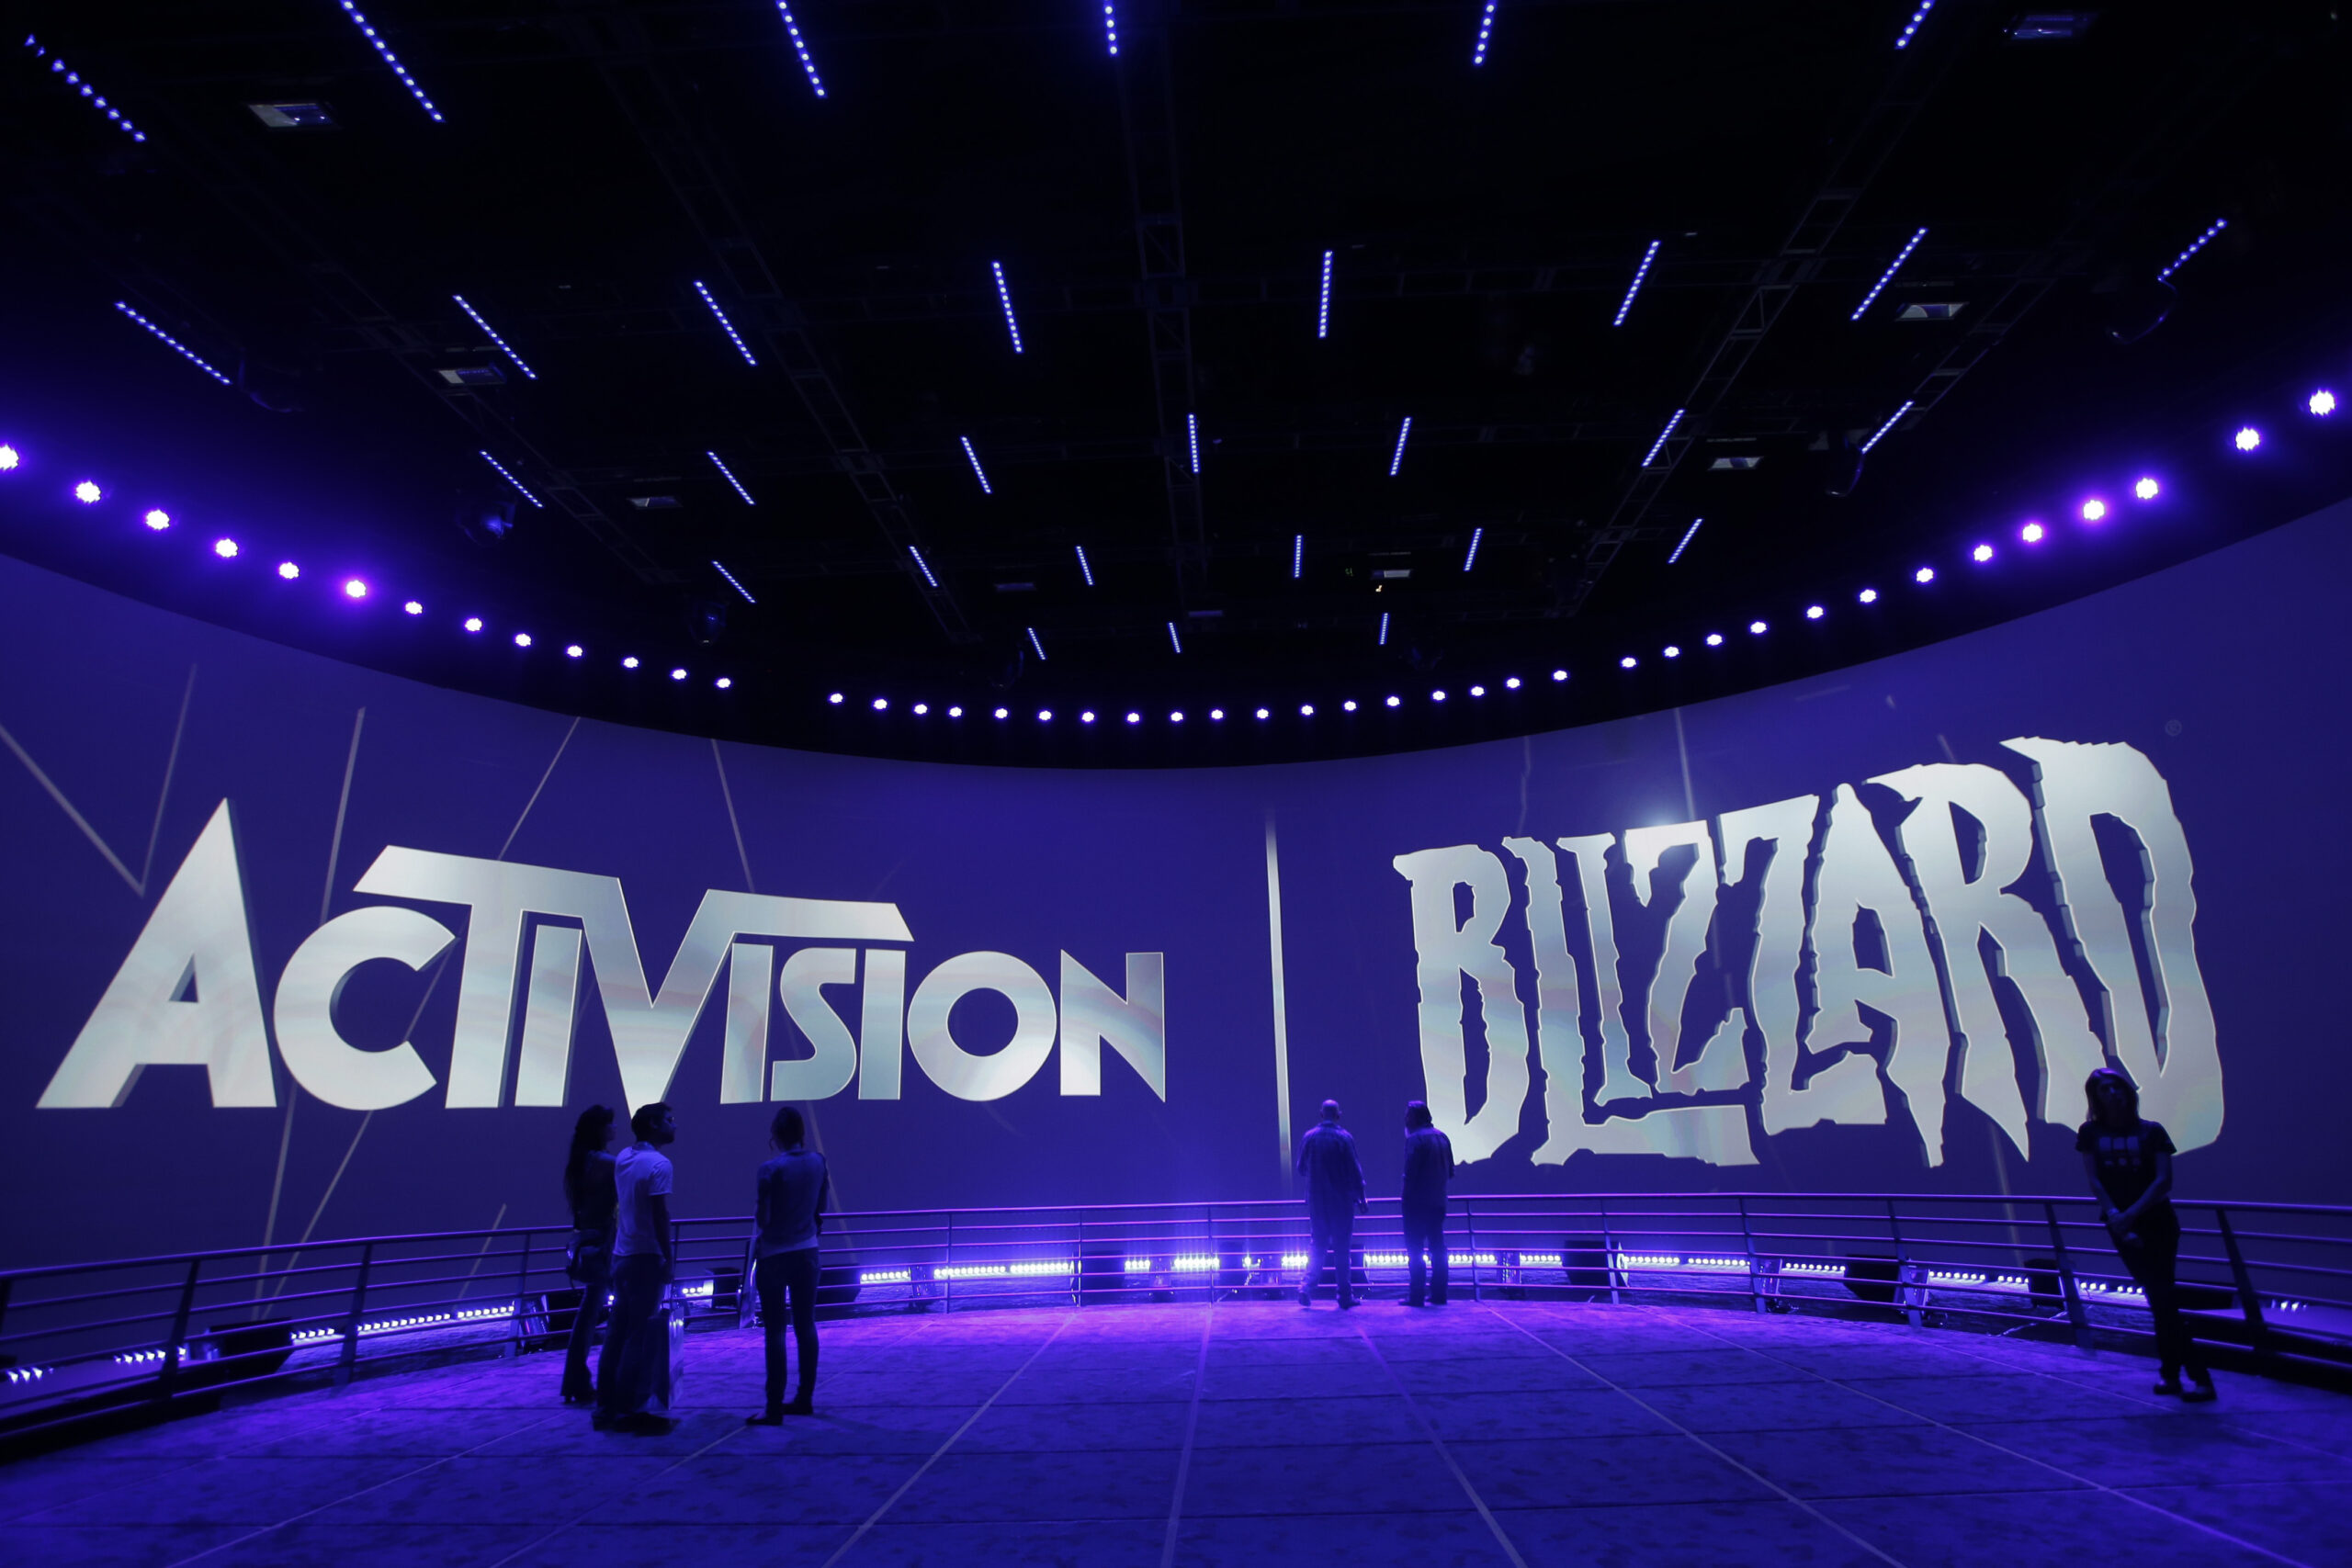 FILE - This June 13, 2013 file photo shows the Activision Blizzard Booth during the Electronic Entertainment Expo in Los Angeles. The president of Activision's Blizzard Entertainment is stepping down, Tuesday, Aug. 3, 2021, weeks after the company was hit with a discrimination and sexual harassment lawsuit in California as well as backlash from employees over the work environment. (AP Photo/Jae C. Hong, File)